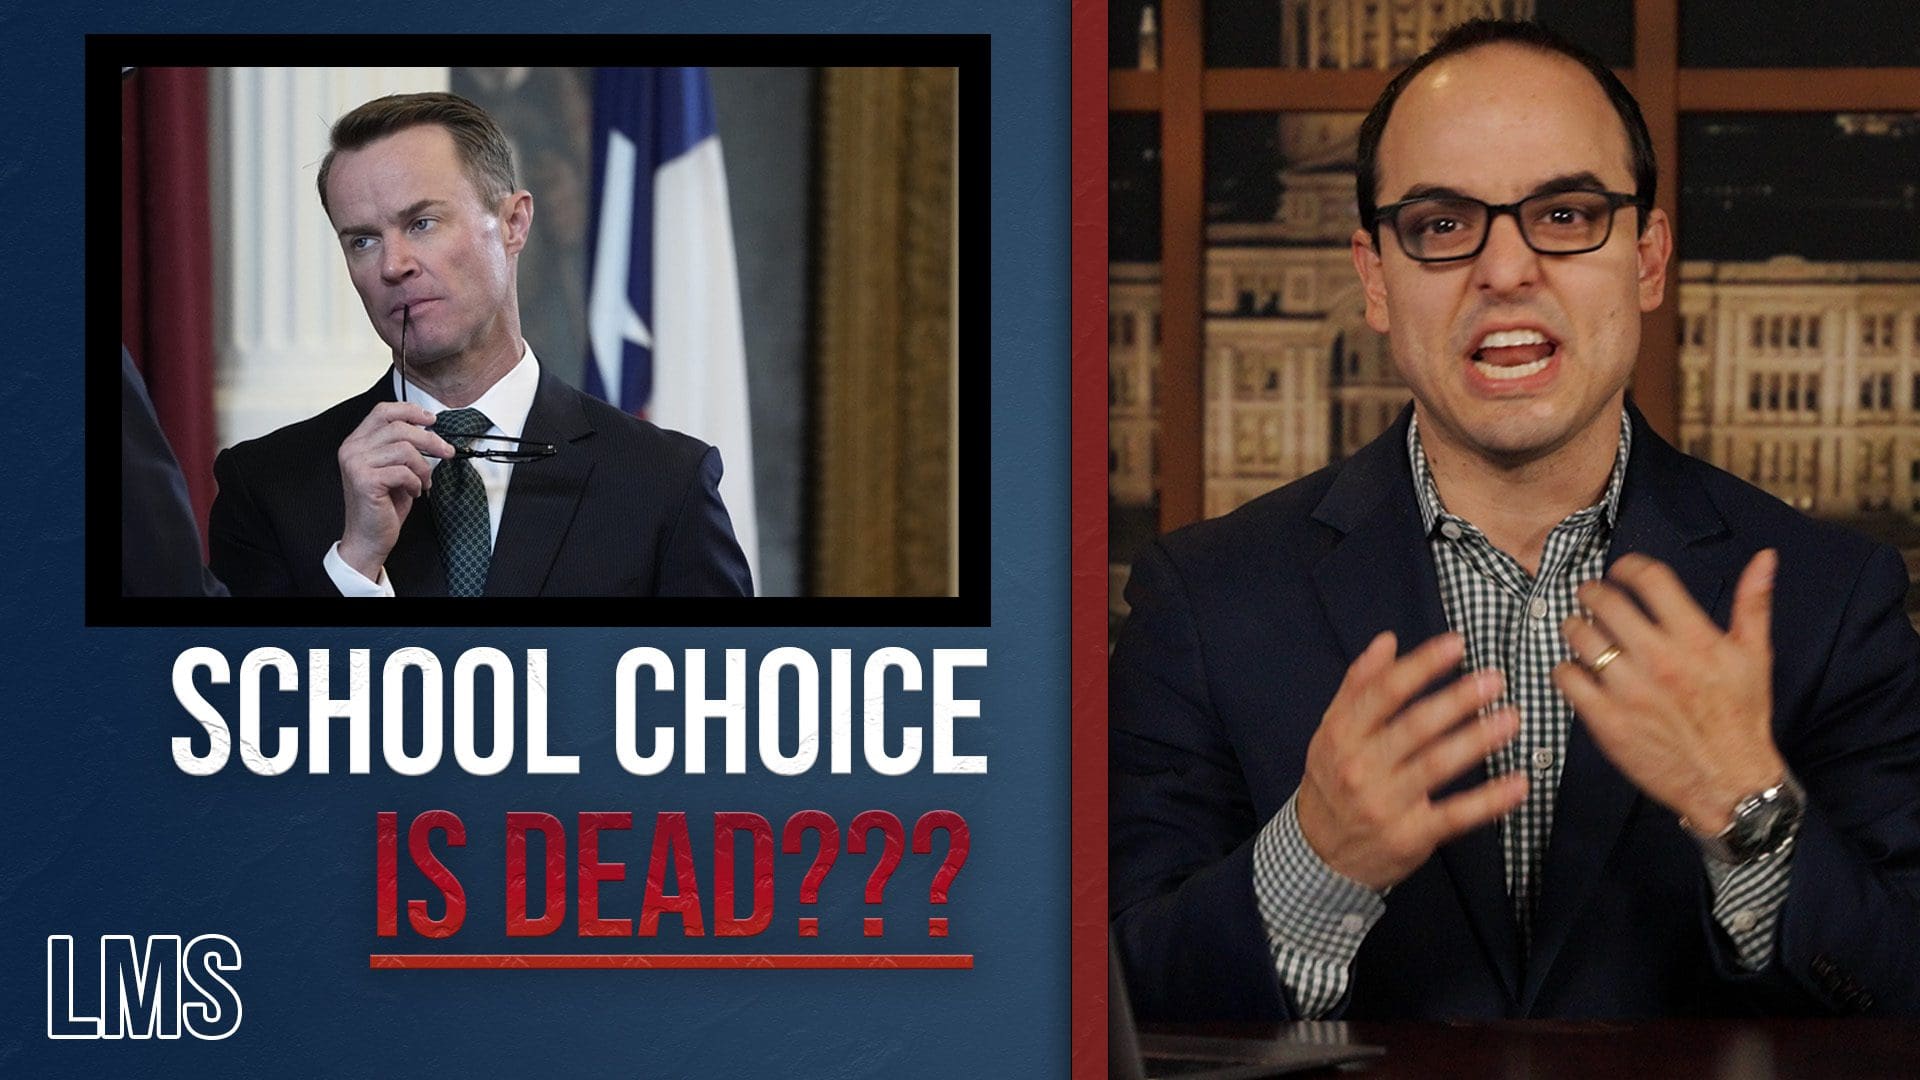 How Dade Phelan Will Try to Co-opt the School Choice Movement